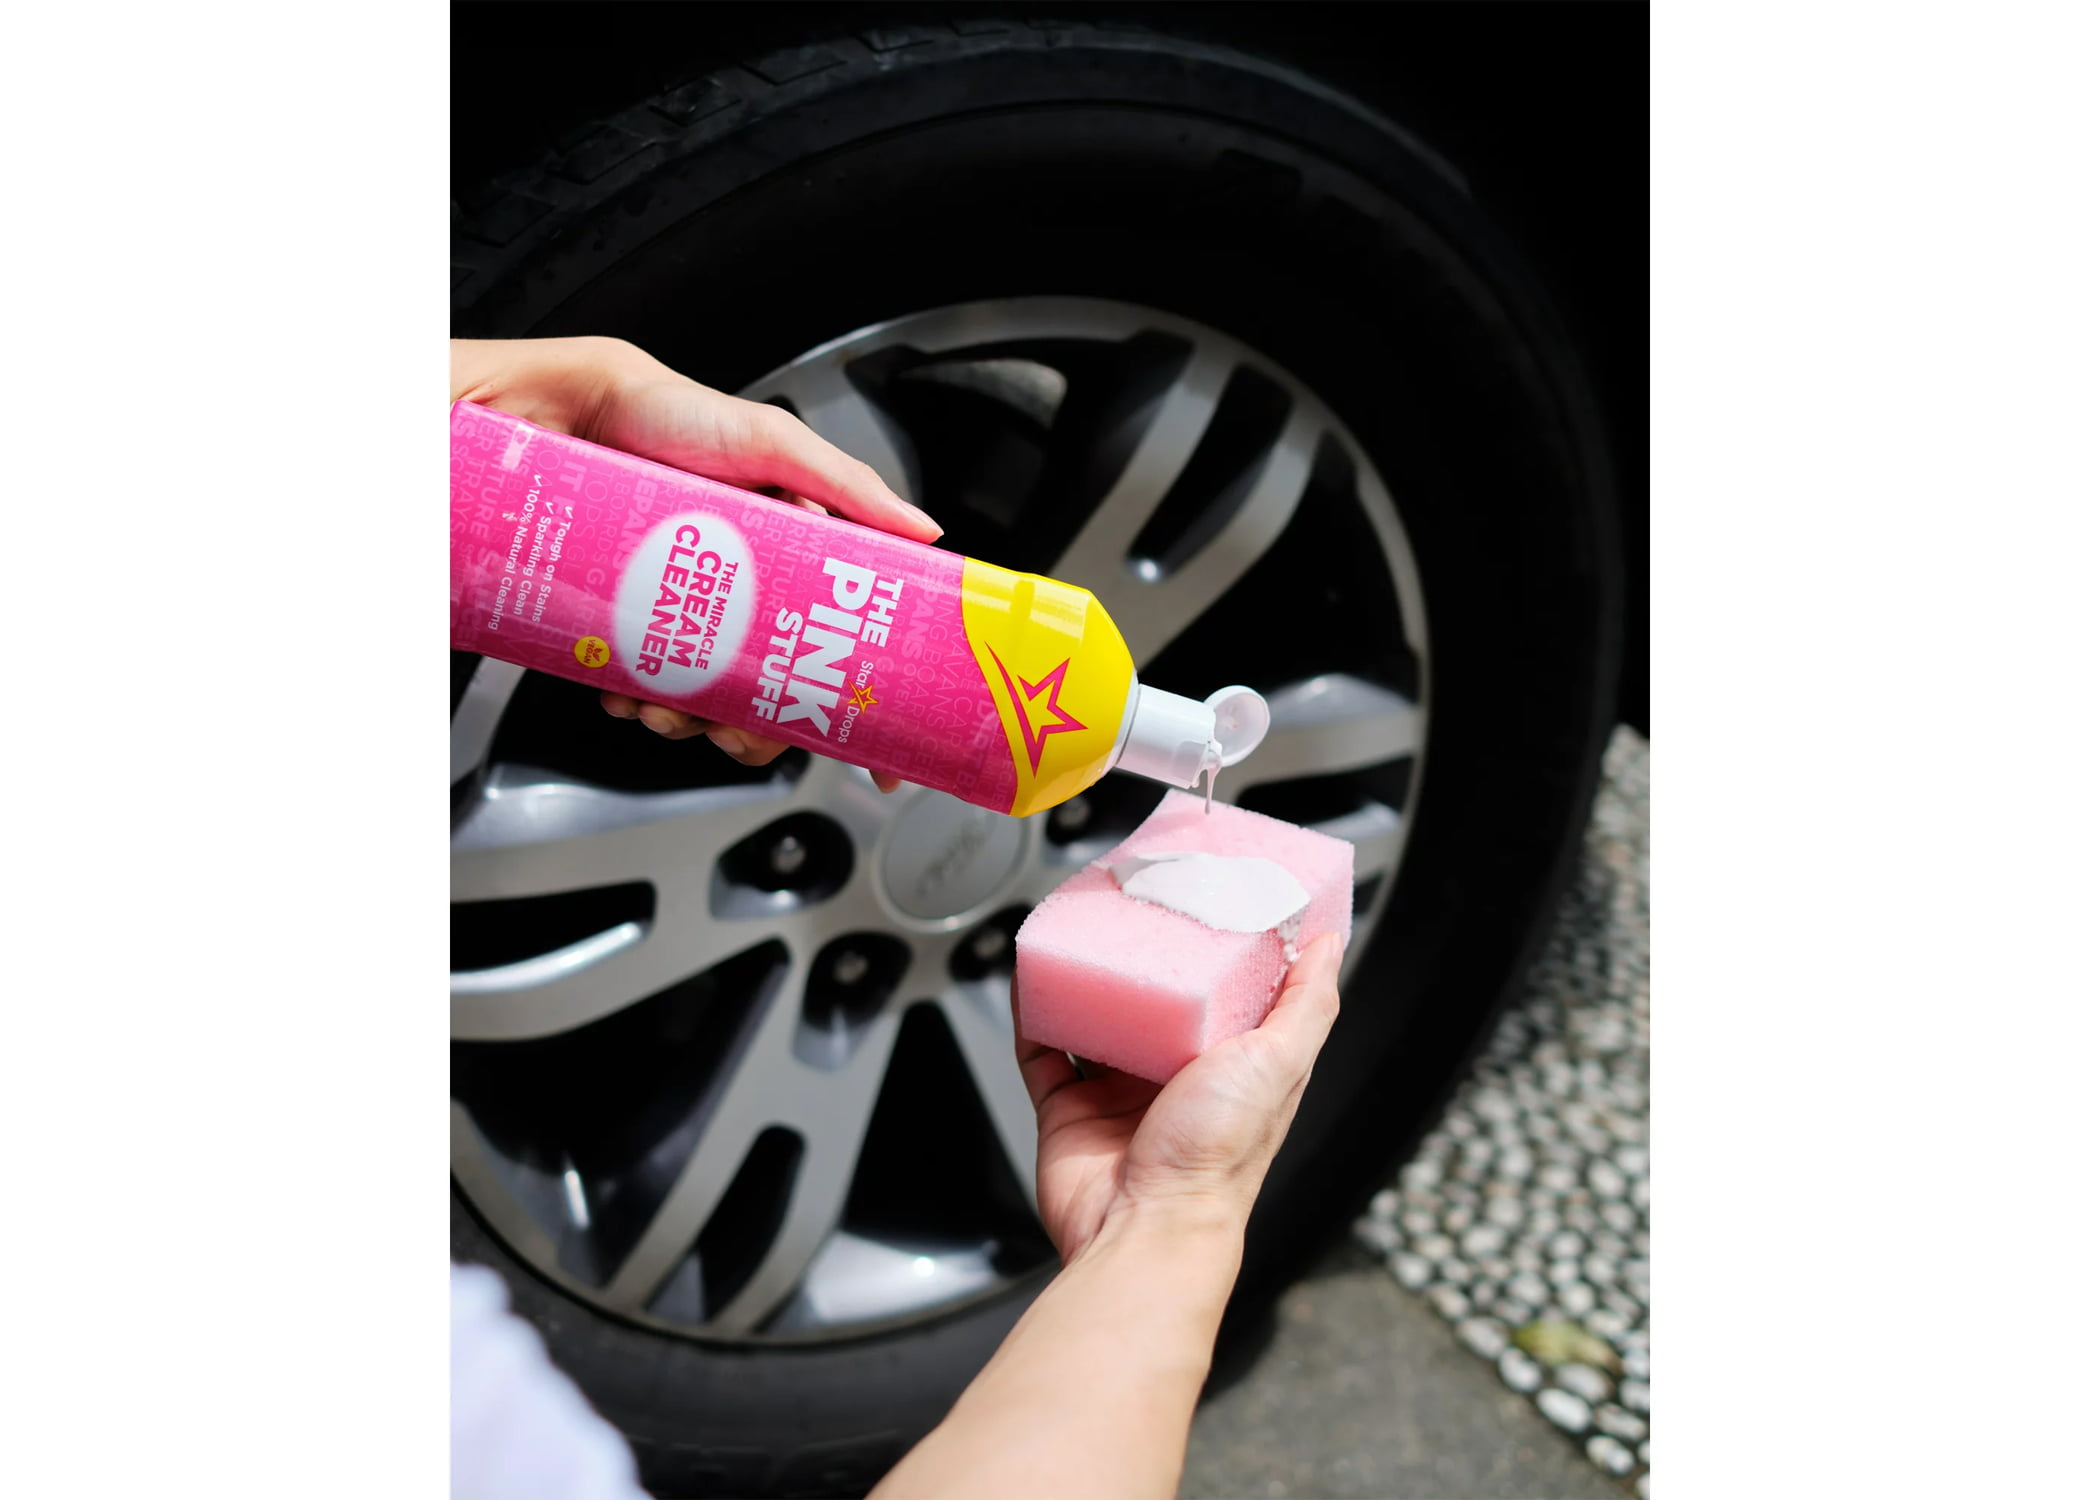 THE PINK STUFF - The Miracle Cream Cleaner – The Pink Stuff